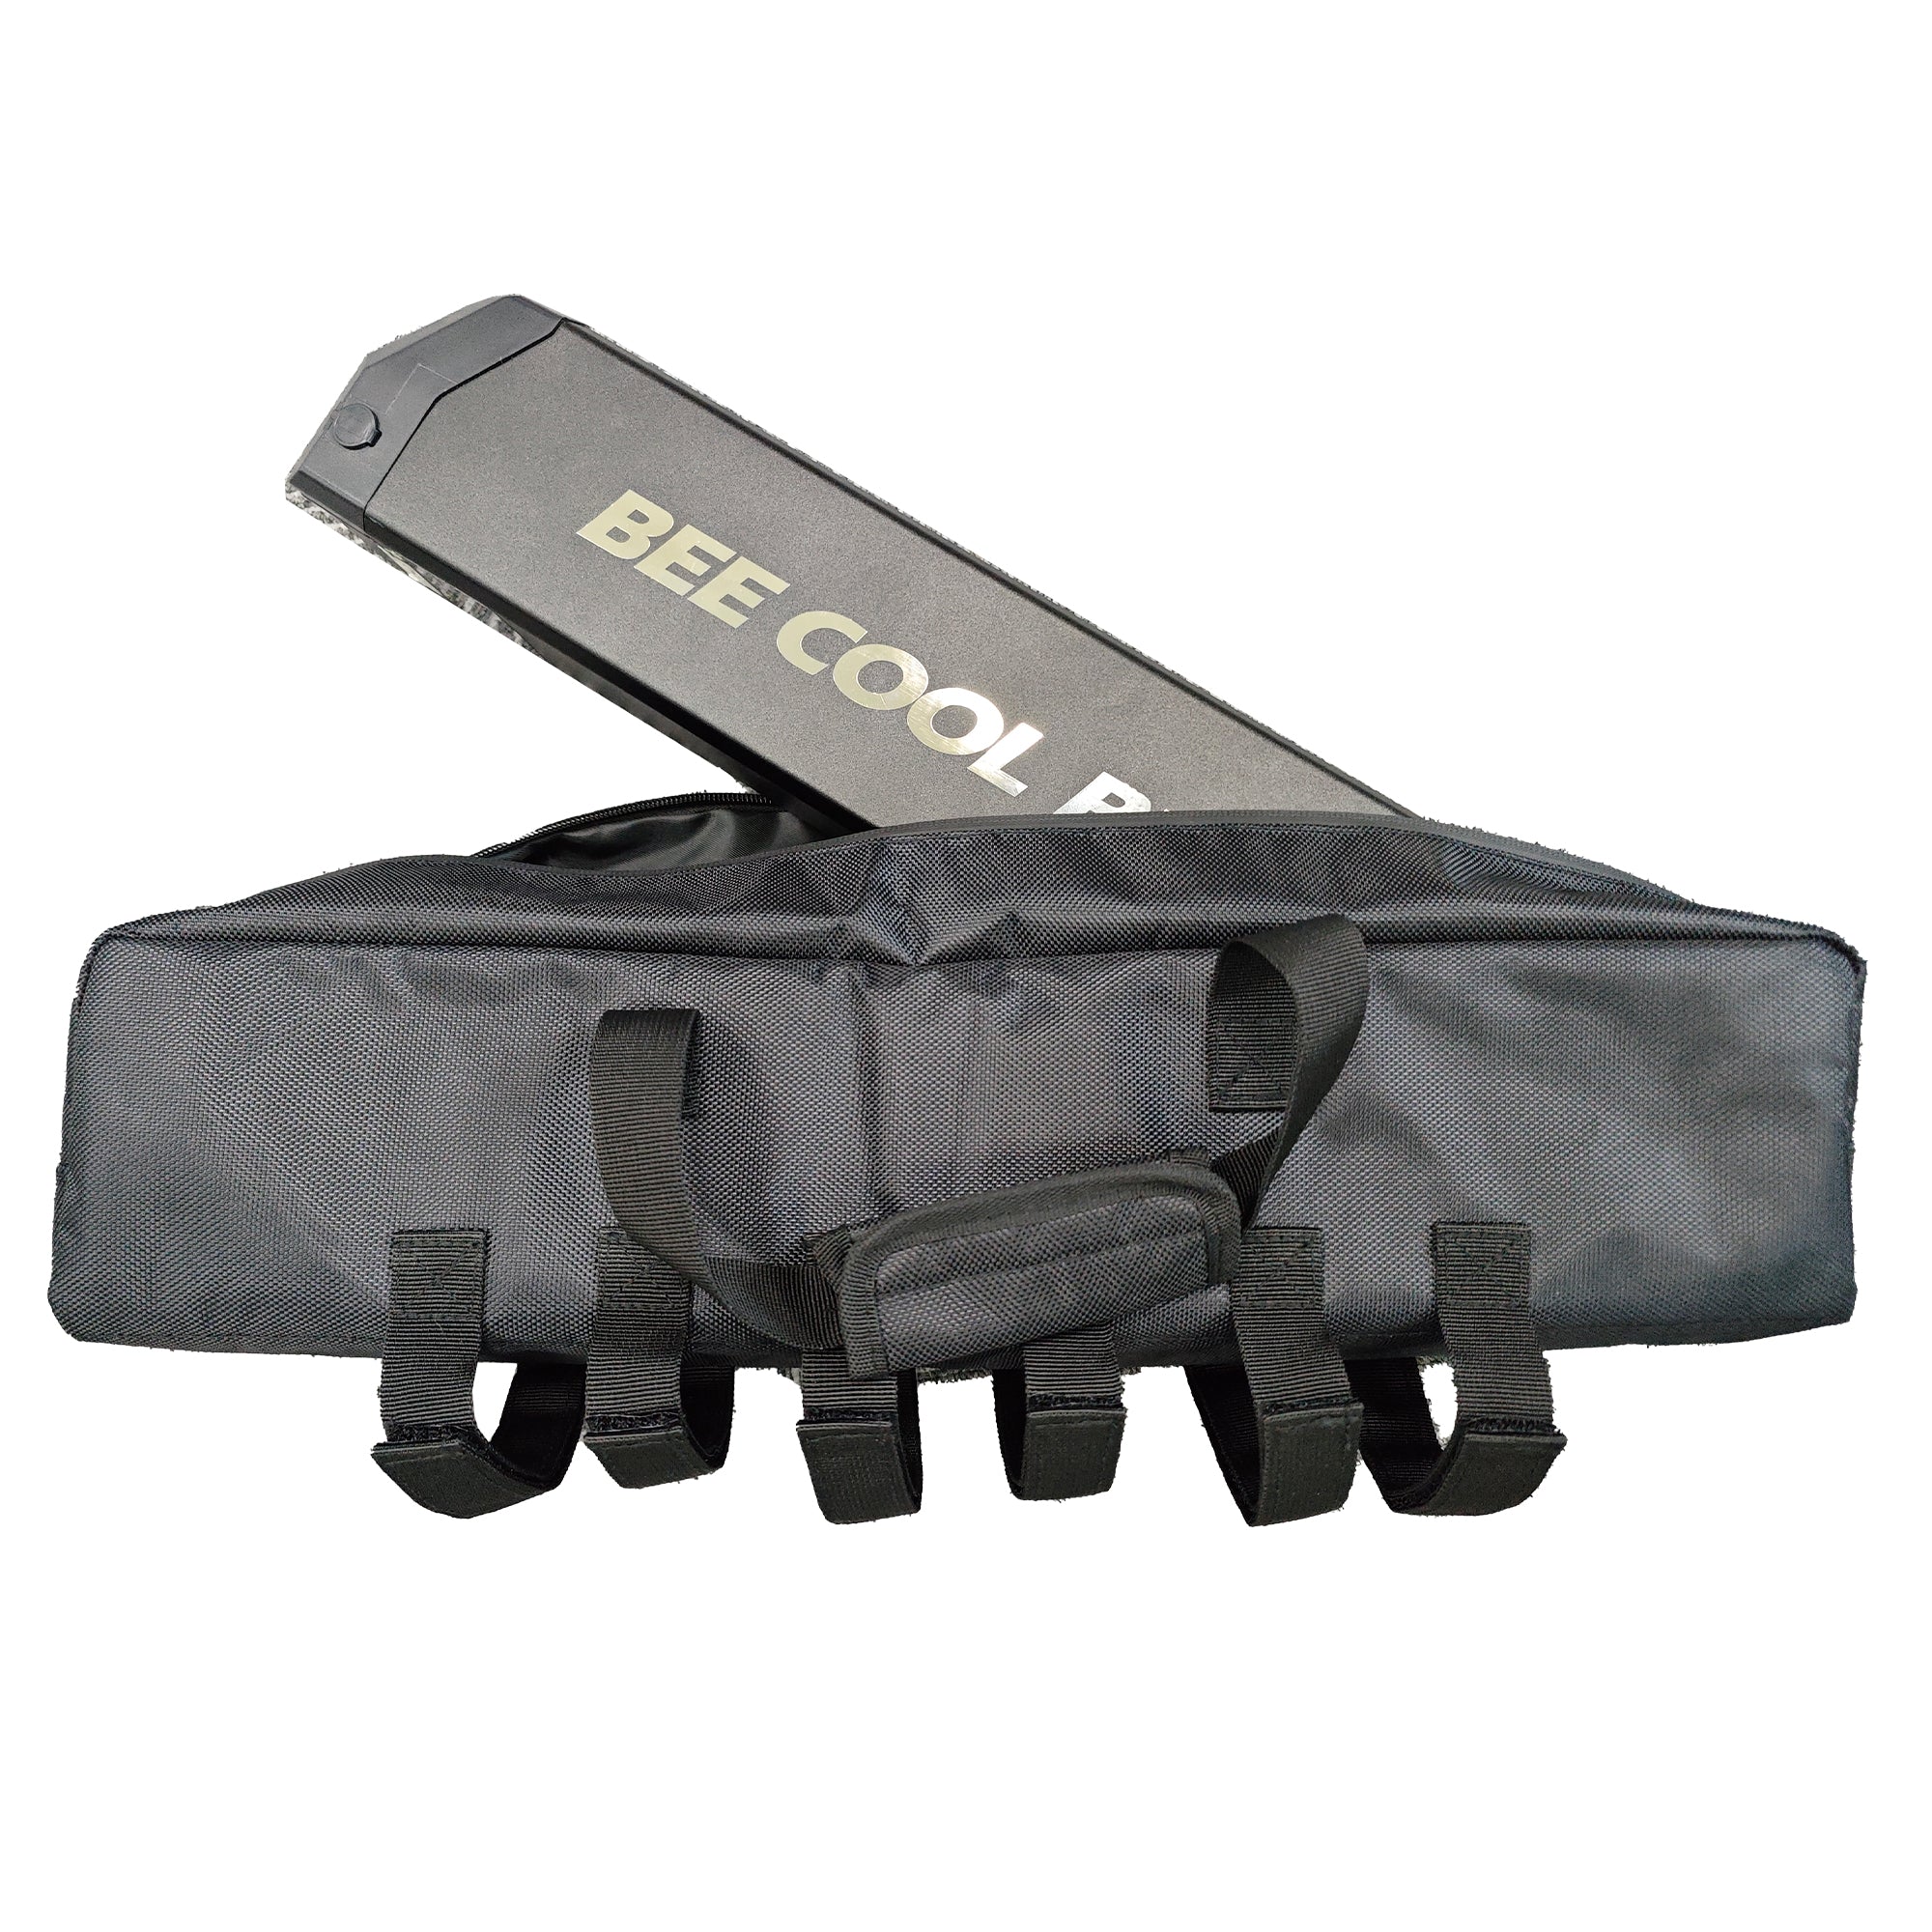 Battery Bag with Mounting Stripes